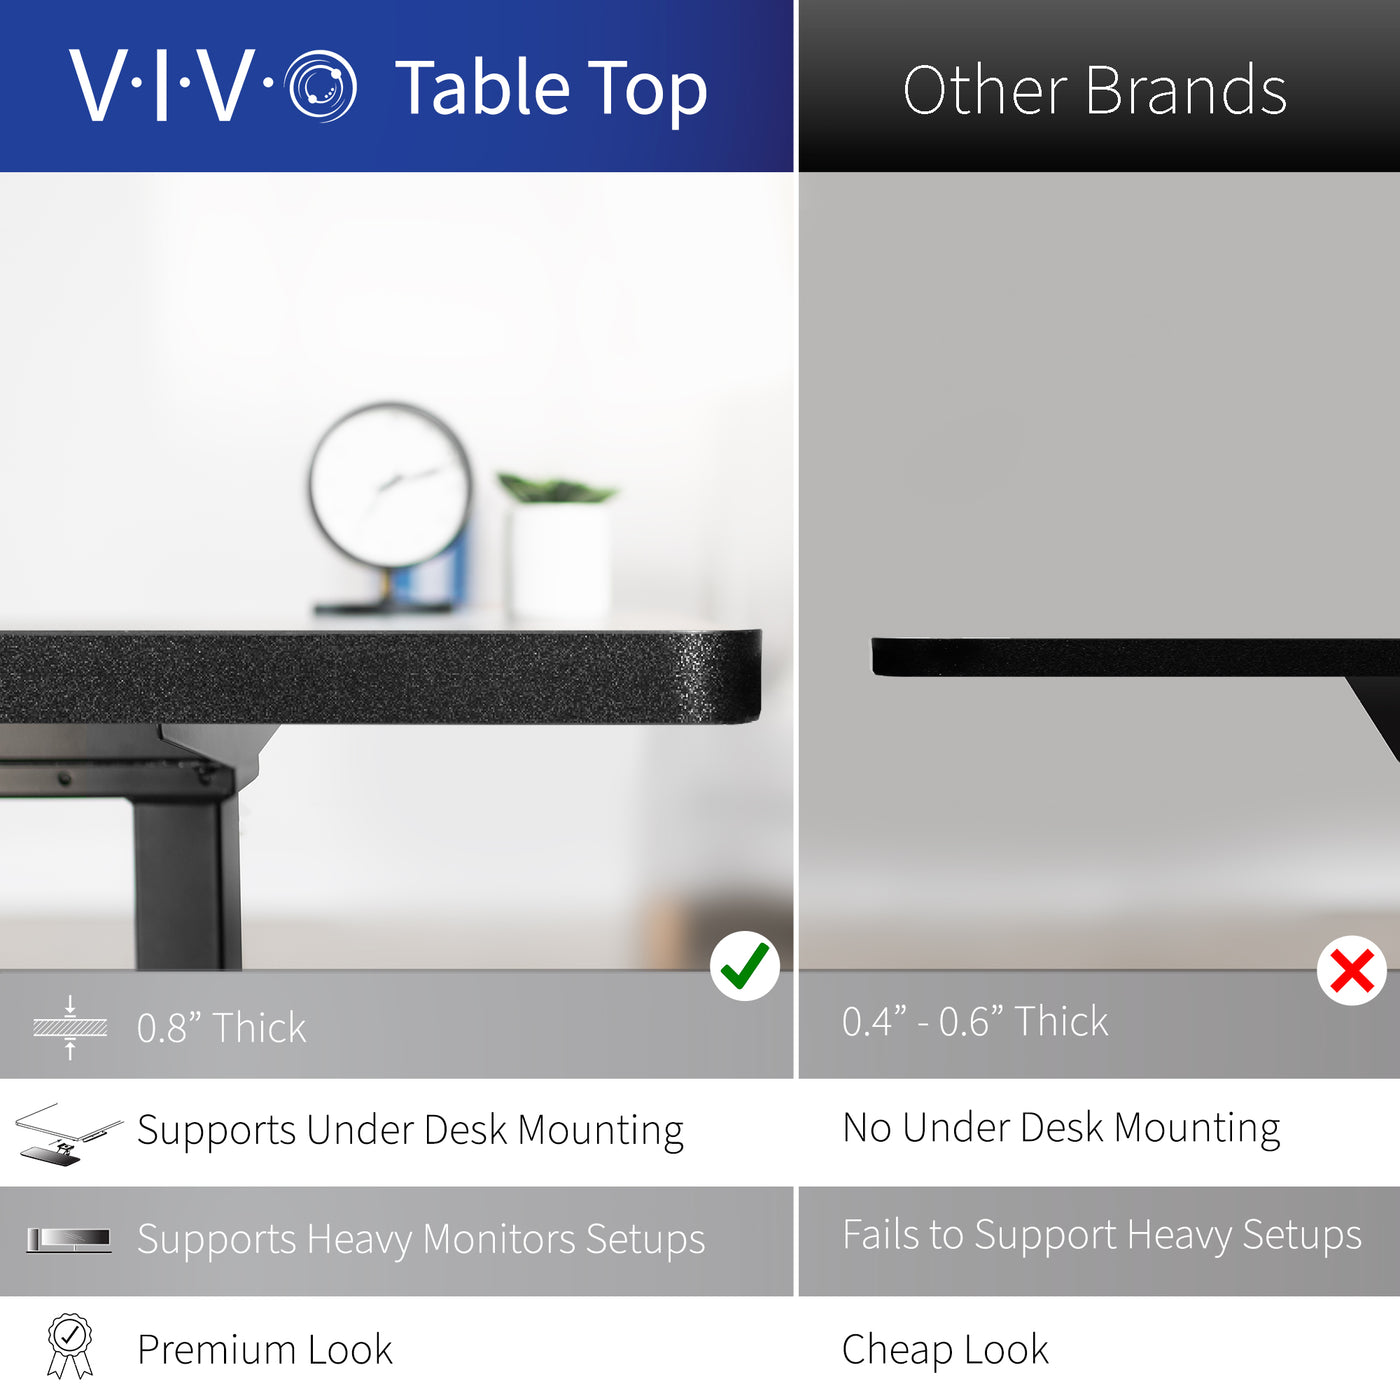 Sturdy VIVO desktops with a premium look and quality compared to other thinner desks on the market.